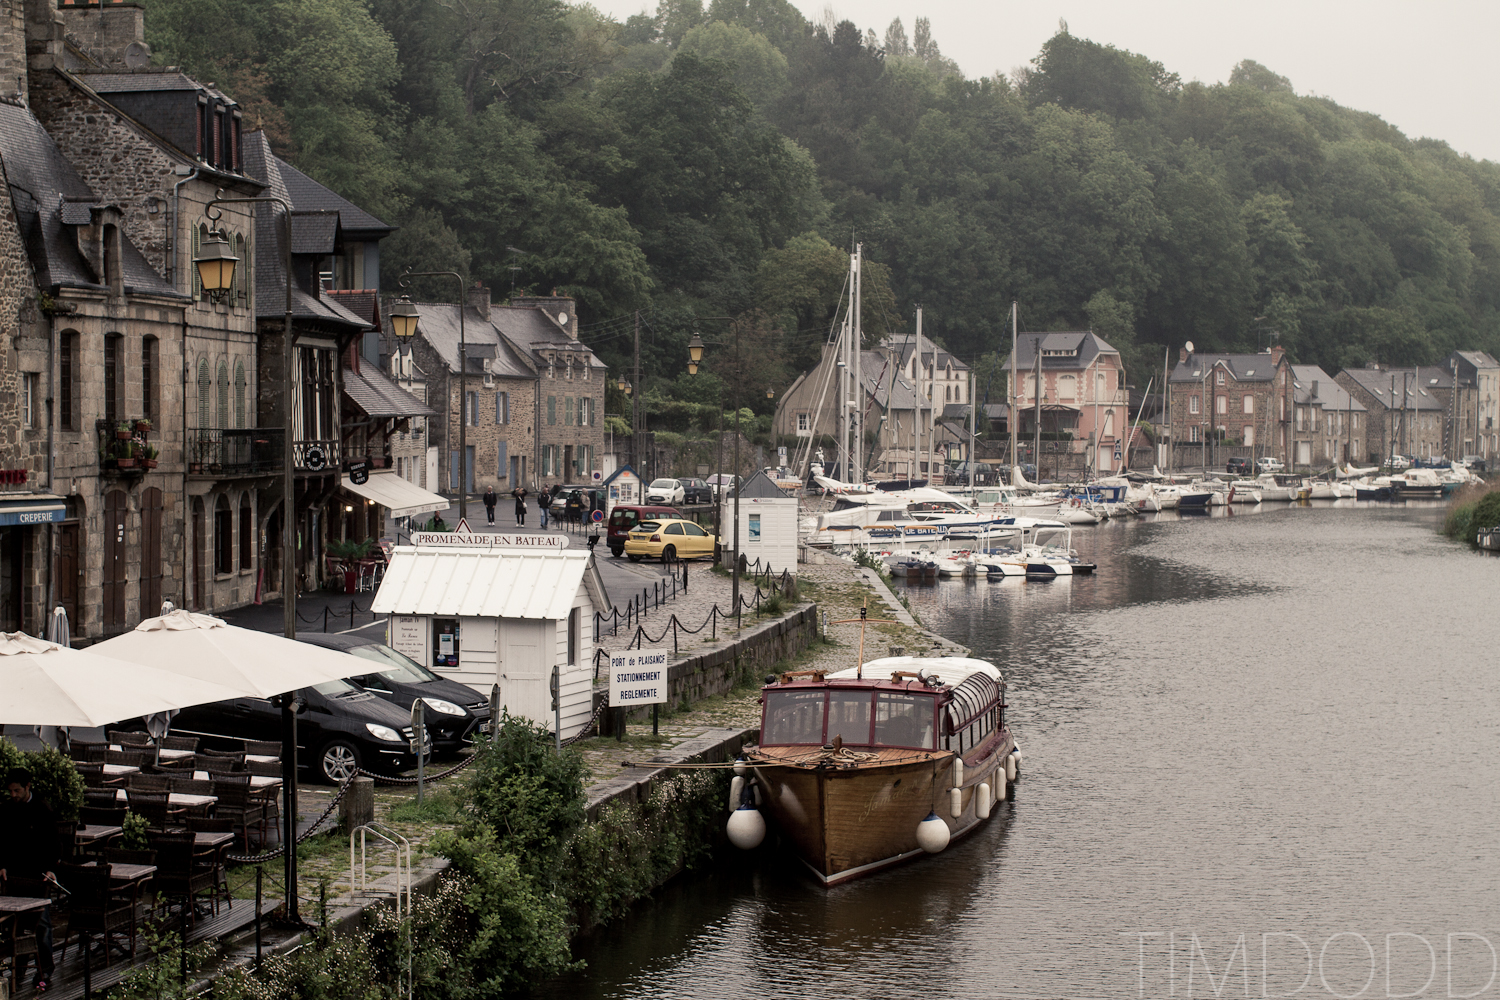 Dinan, France, Tim Dodd Photography, Cedar Falls, Iowa 2 Travel to Europe for cheap, top 10 things to see in Europe, must see, photographers guide, photographs, best pictures,